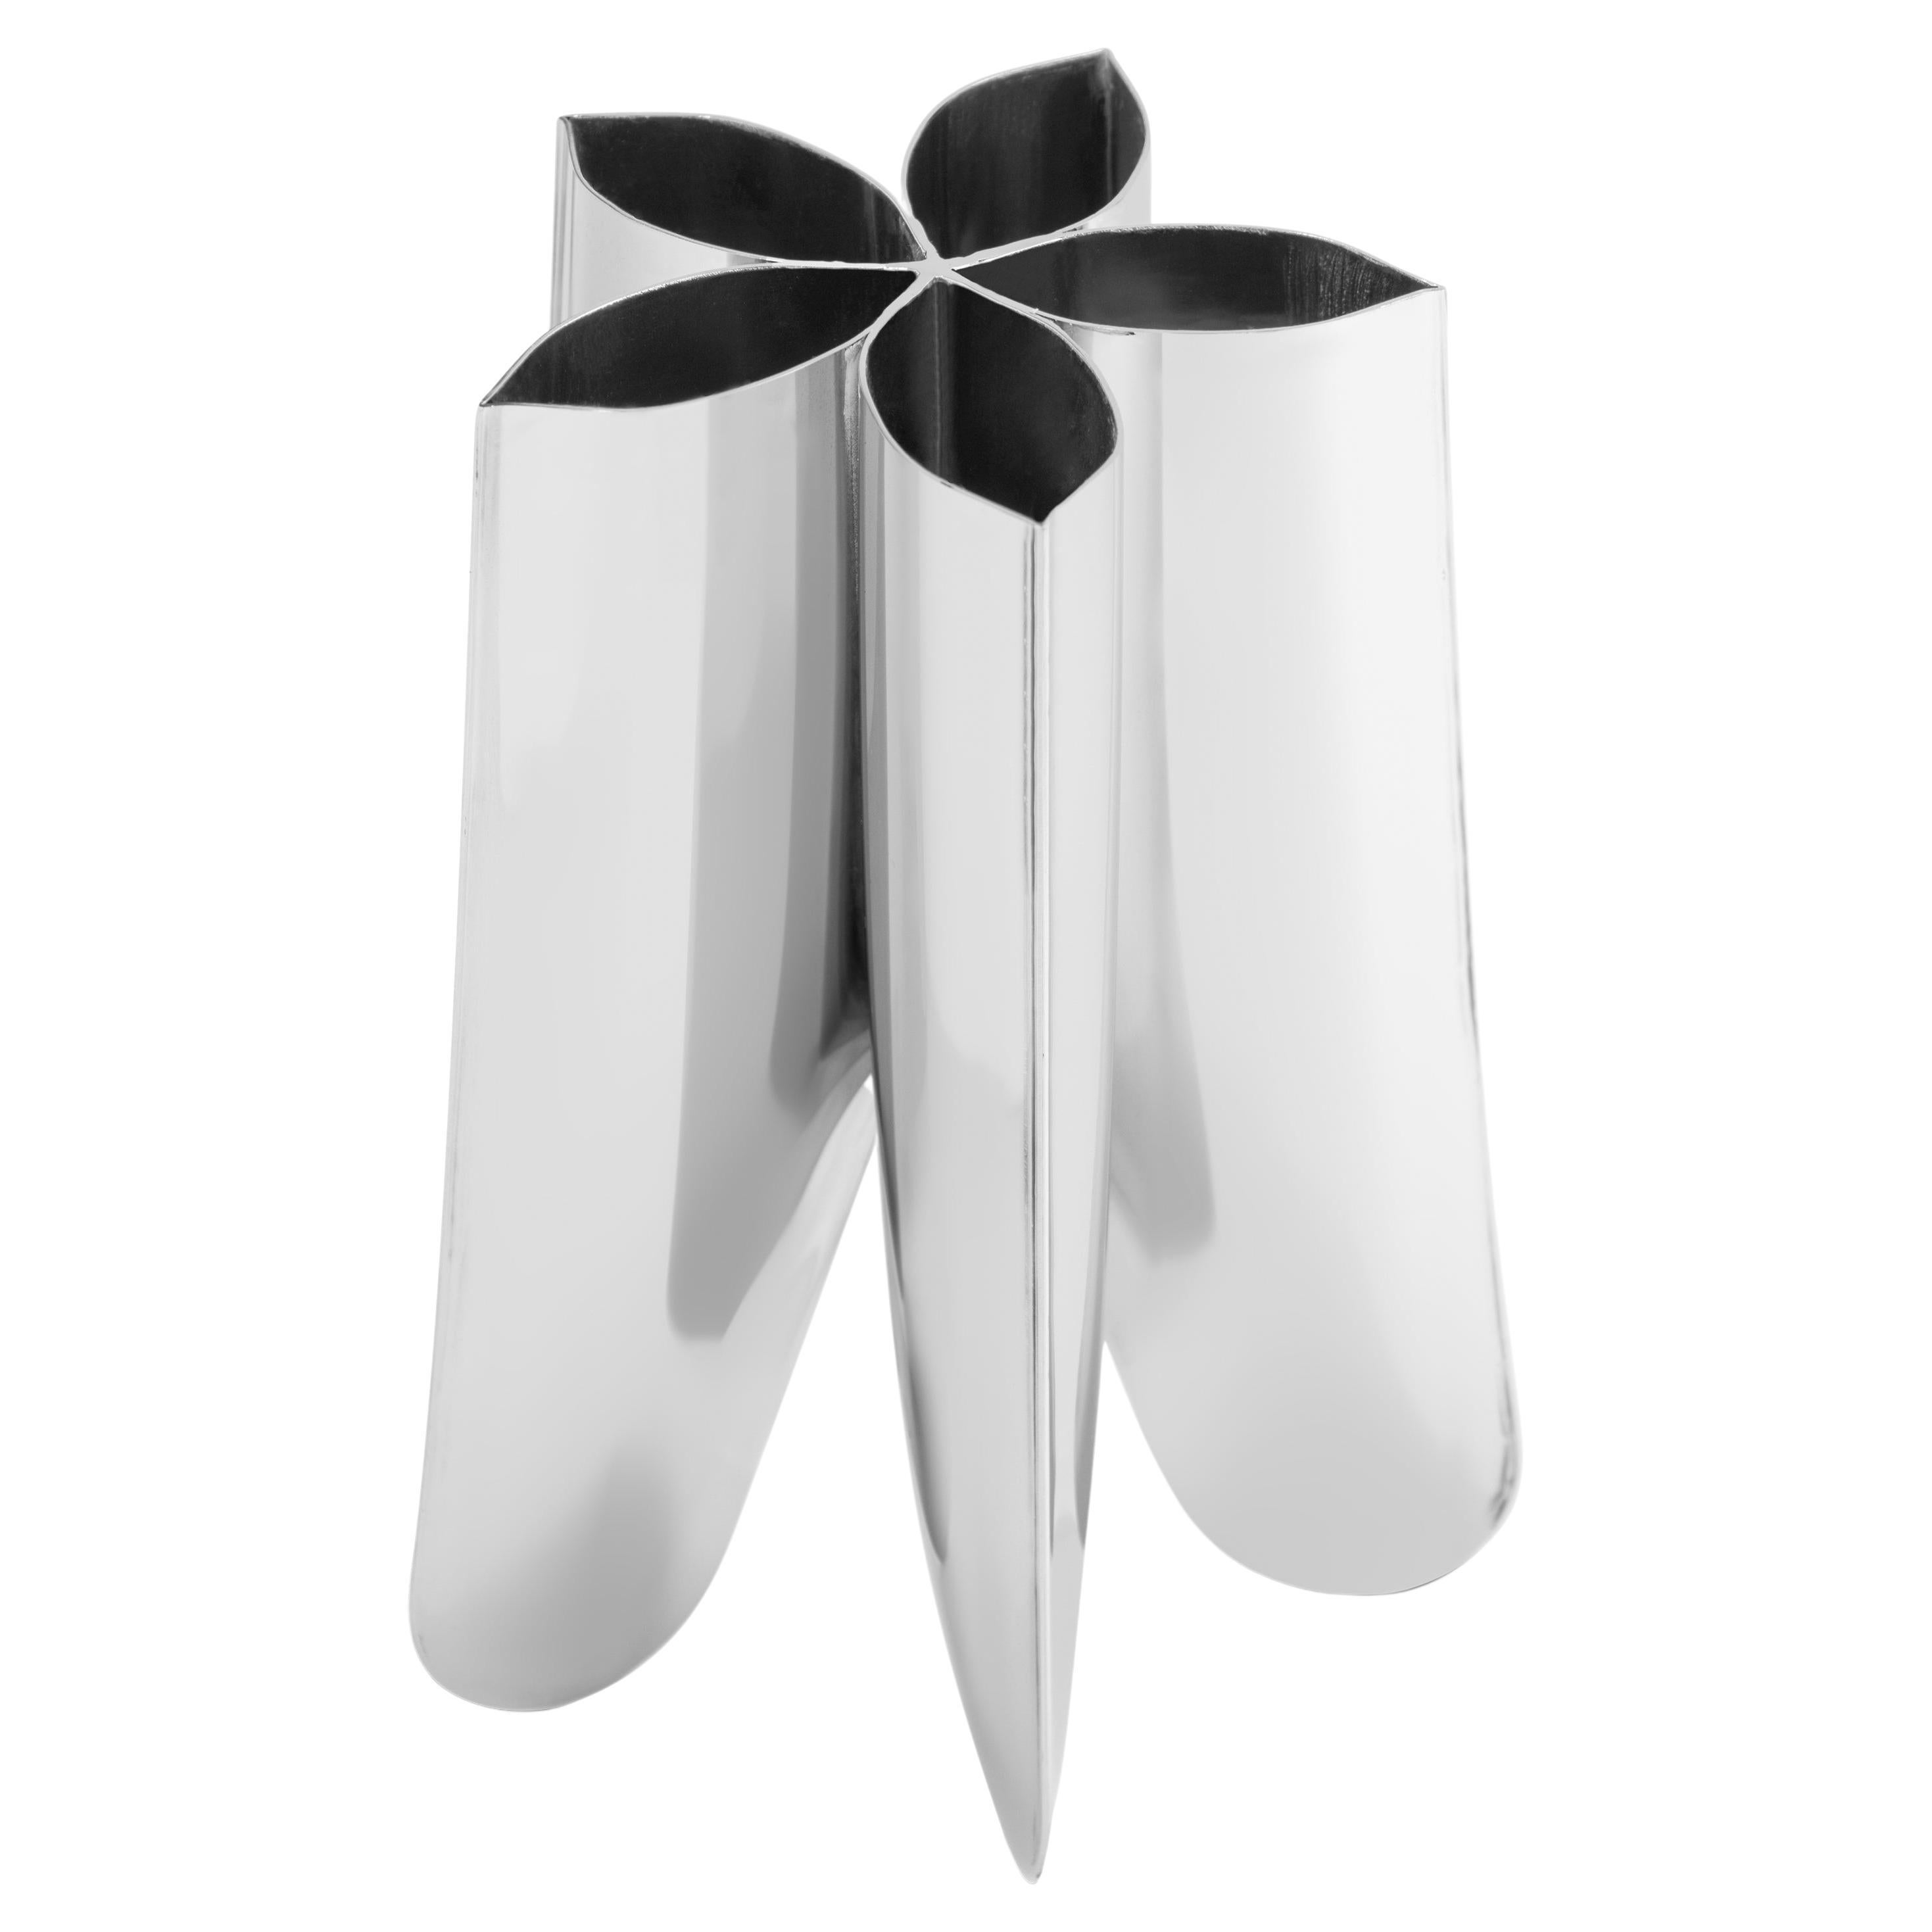 Contemporary Vase, 'Rotation Vase' by Zieta, Medium, Stainless Steel For Sale